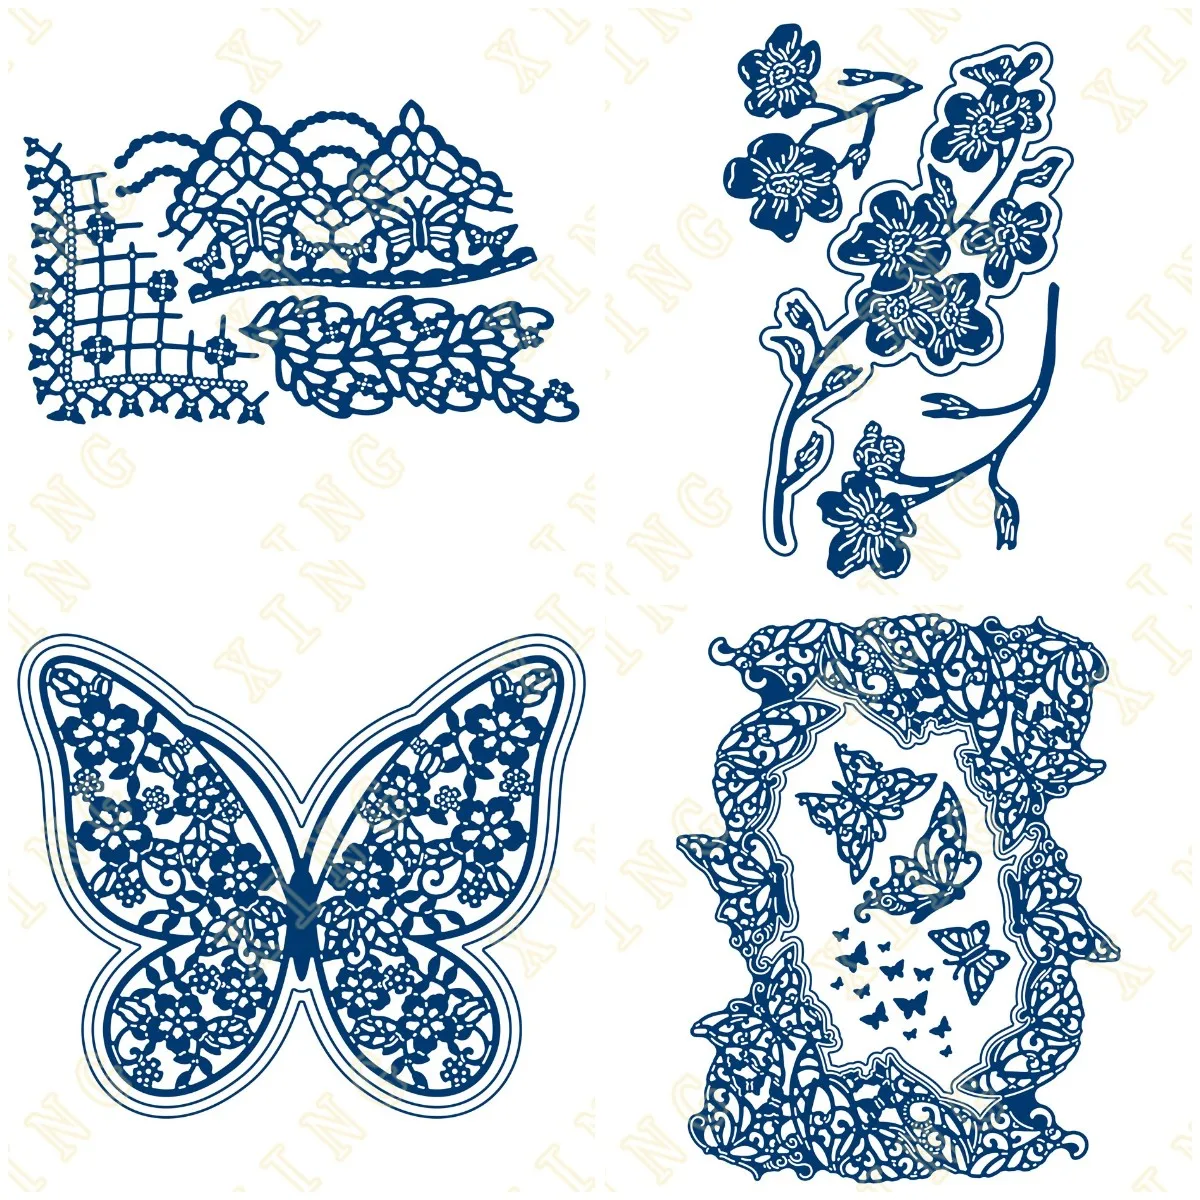 

Butterfly Bliss Collection Metal Cutting Die Scrapbook Embossed Paper Card Album Craft Template Cut Die Stencils New for 2022